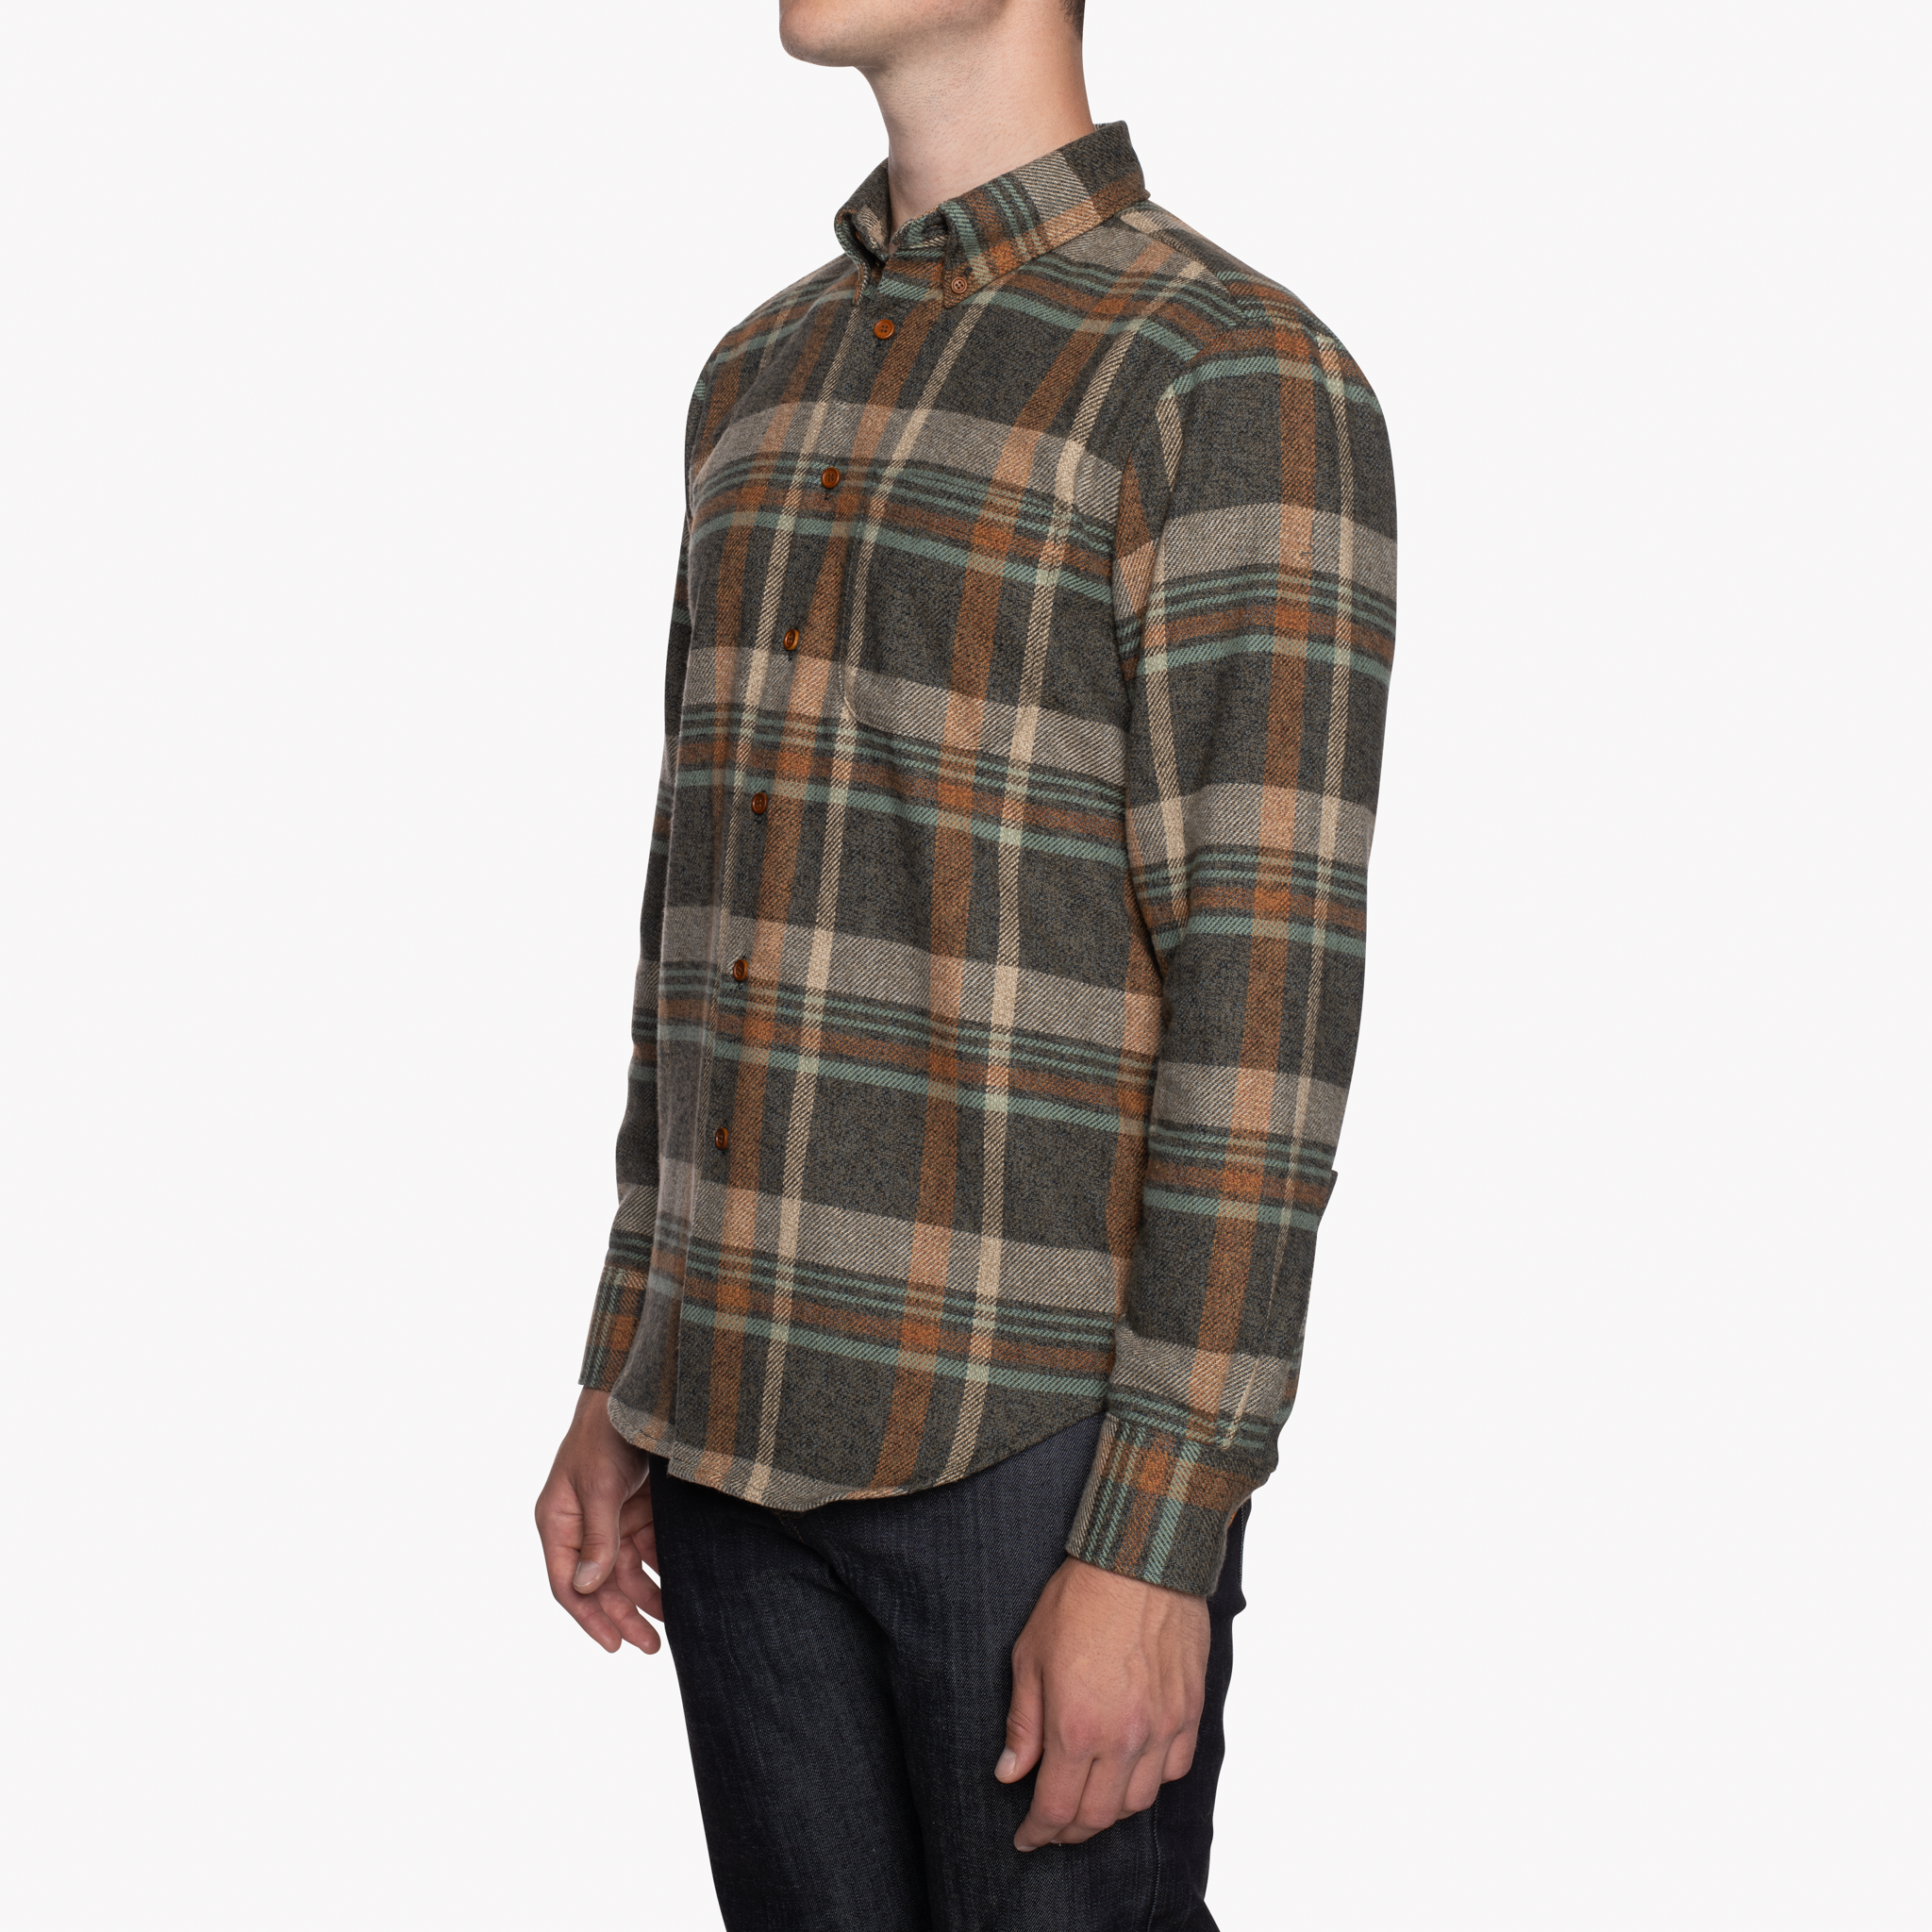  Easy Shirt - Heavy Vintage Flannel - Blue/Rust - side 